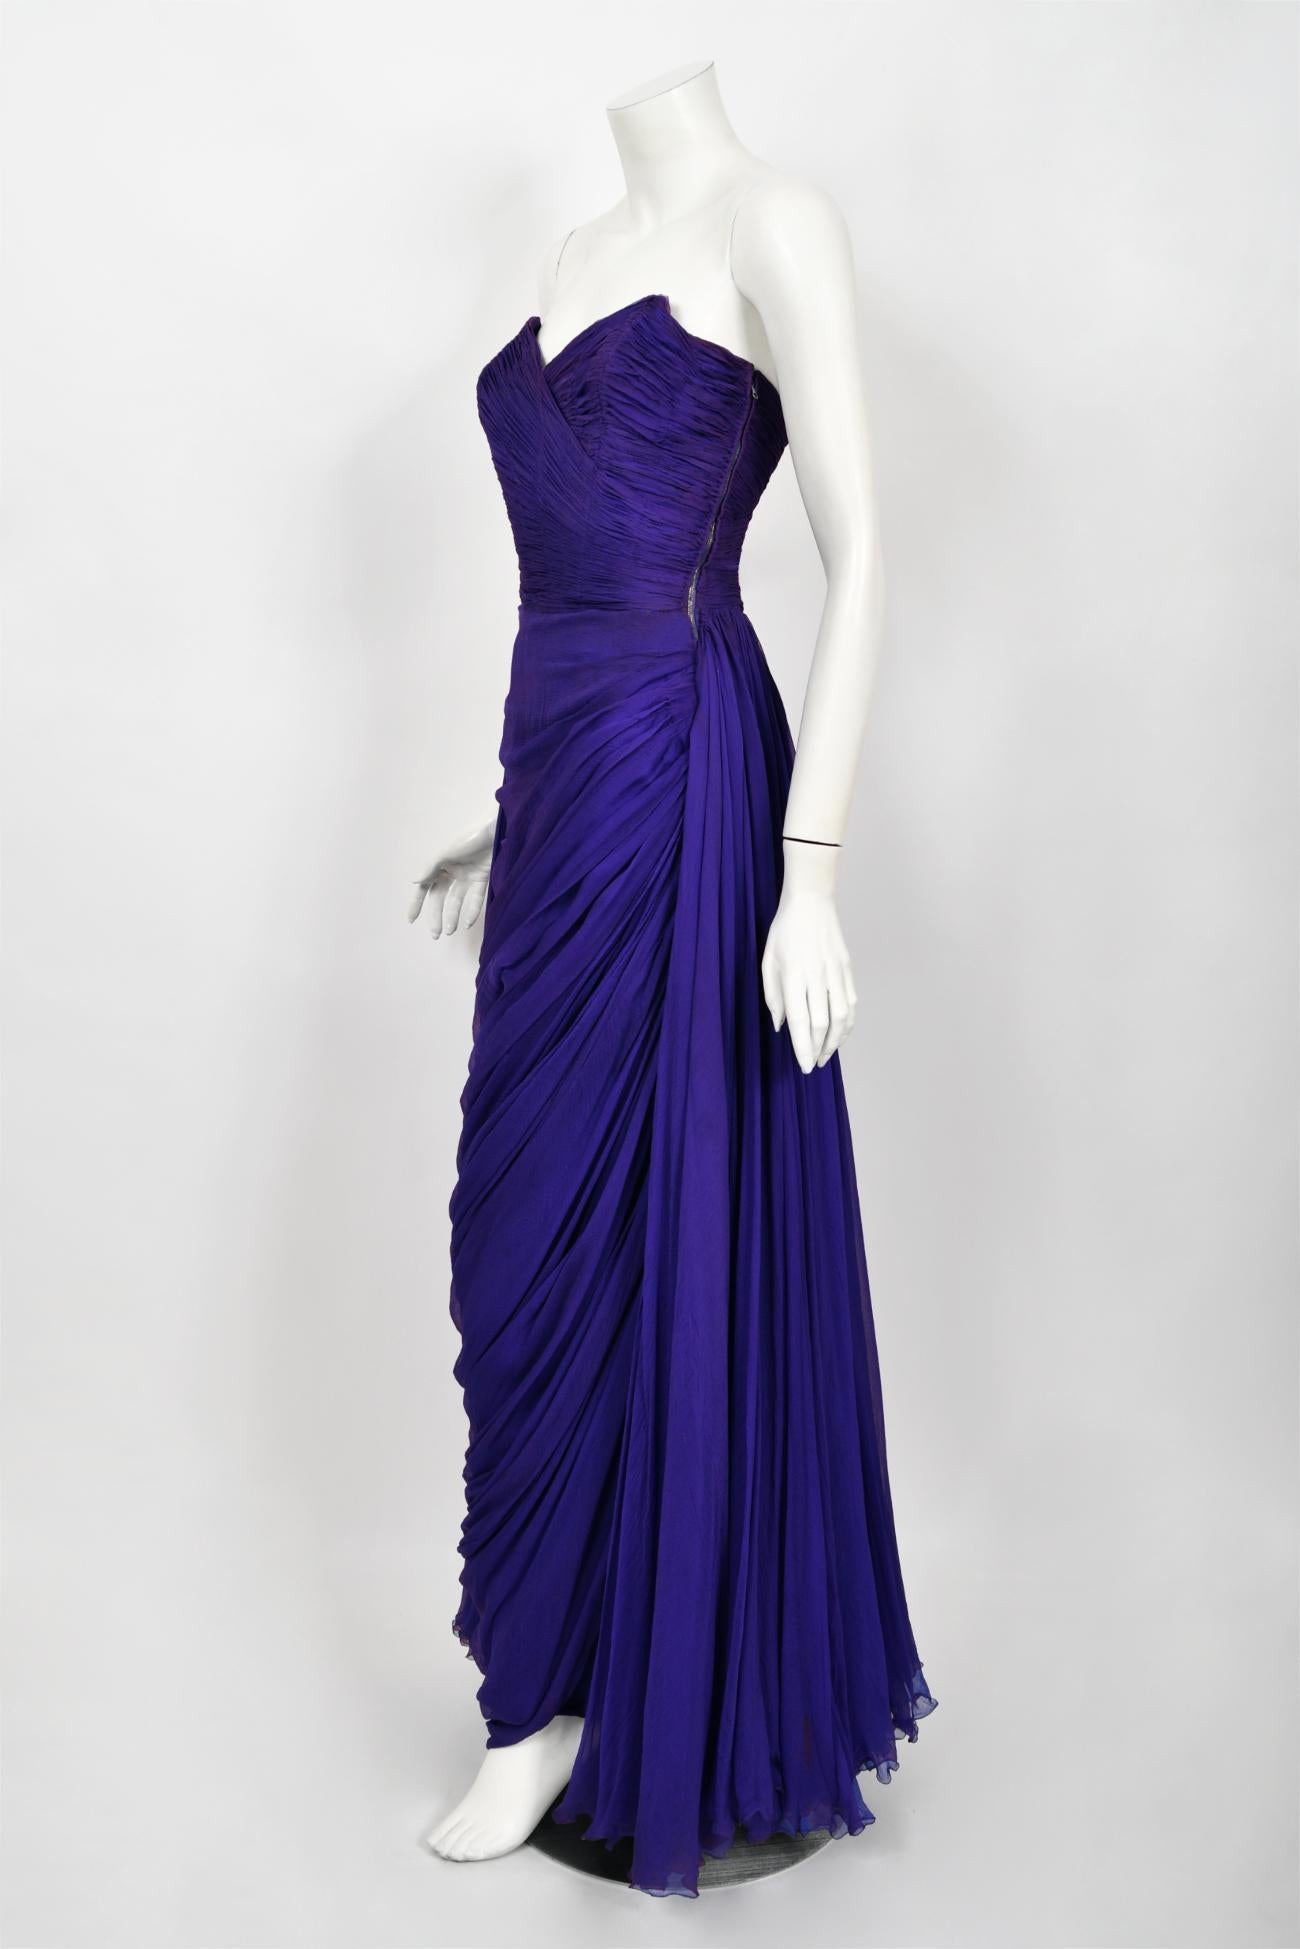 Vintage 1950s Curiel Couture Pleated Purple Silk Chiffon Strapless Goddess Gown  For Sale 7